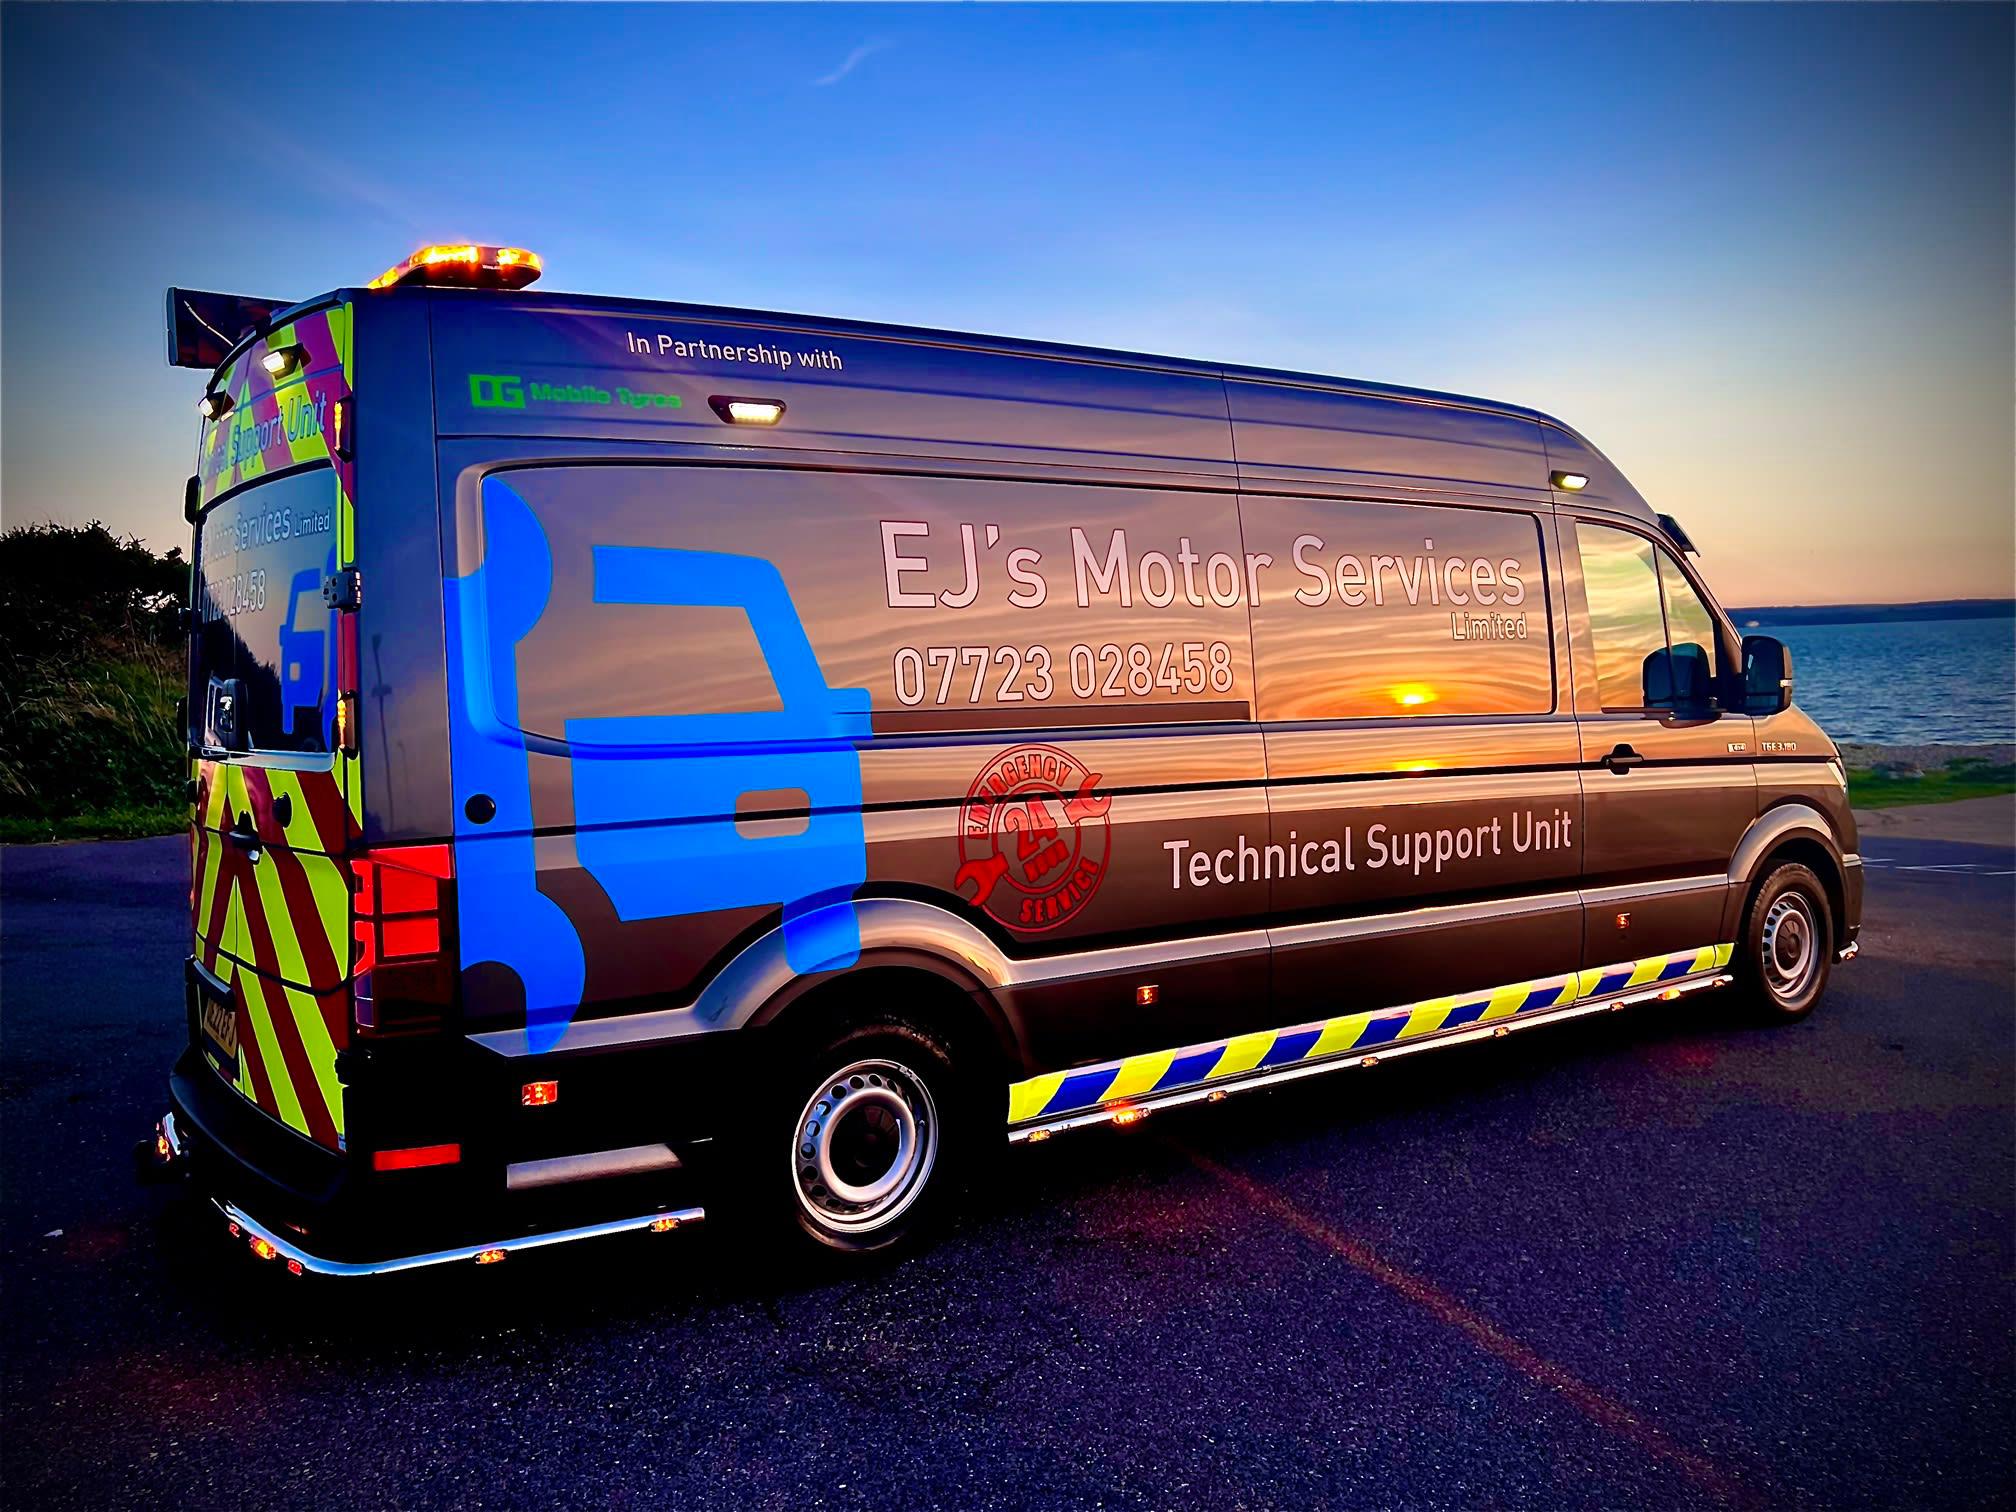 Images EJ's Motor Services Limited